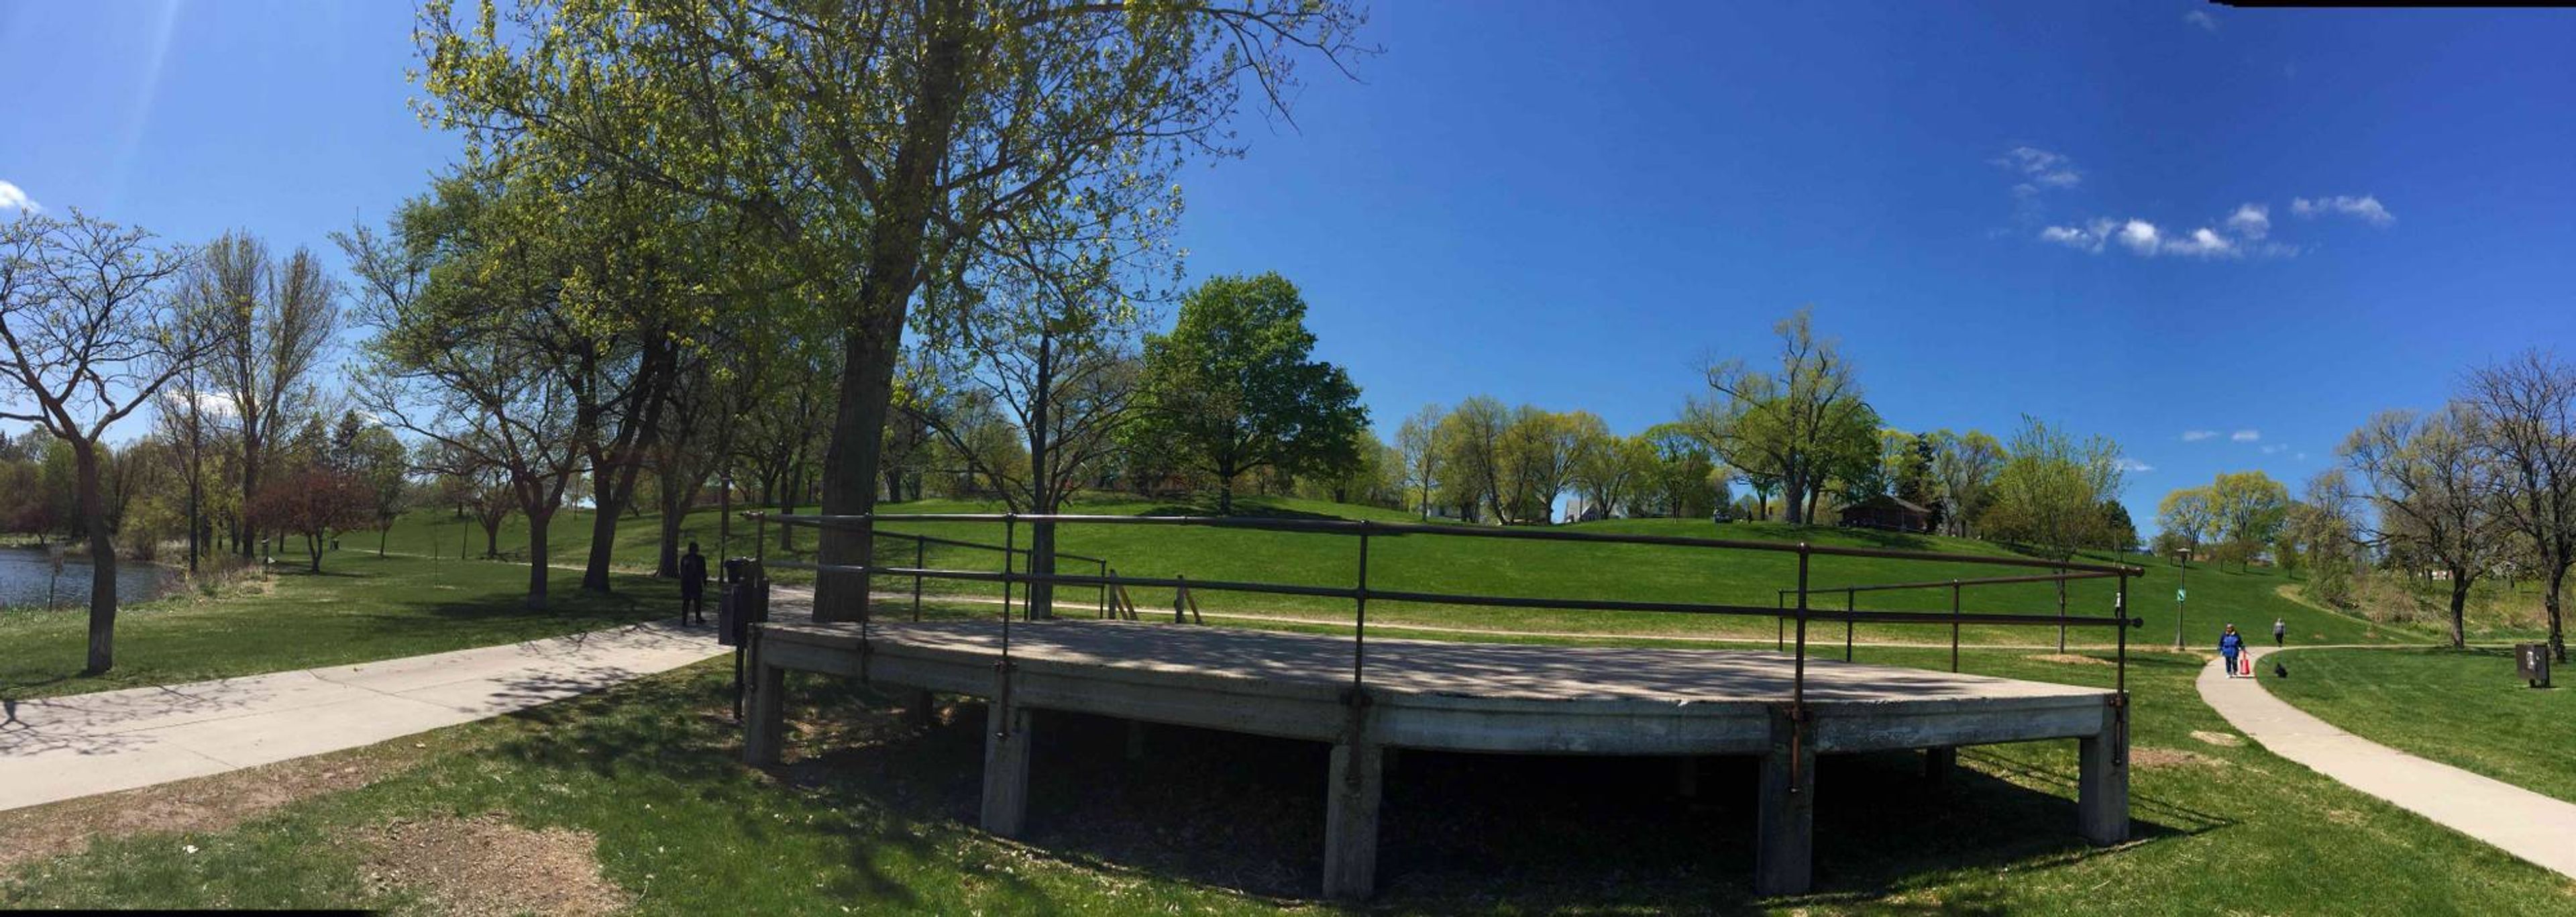 The bandstand and west hillside of Powderhorn Park, the location of the record-setting sings event that included members of the Mille Lacs Band of Ojibwe.